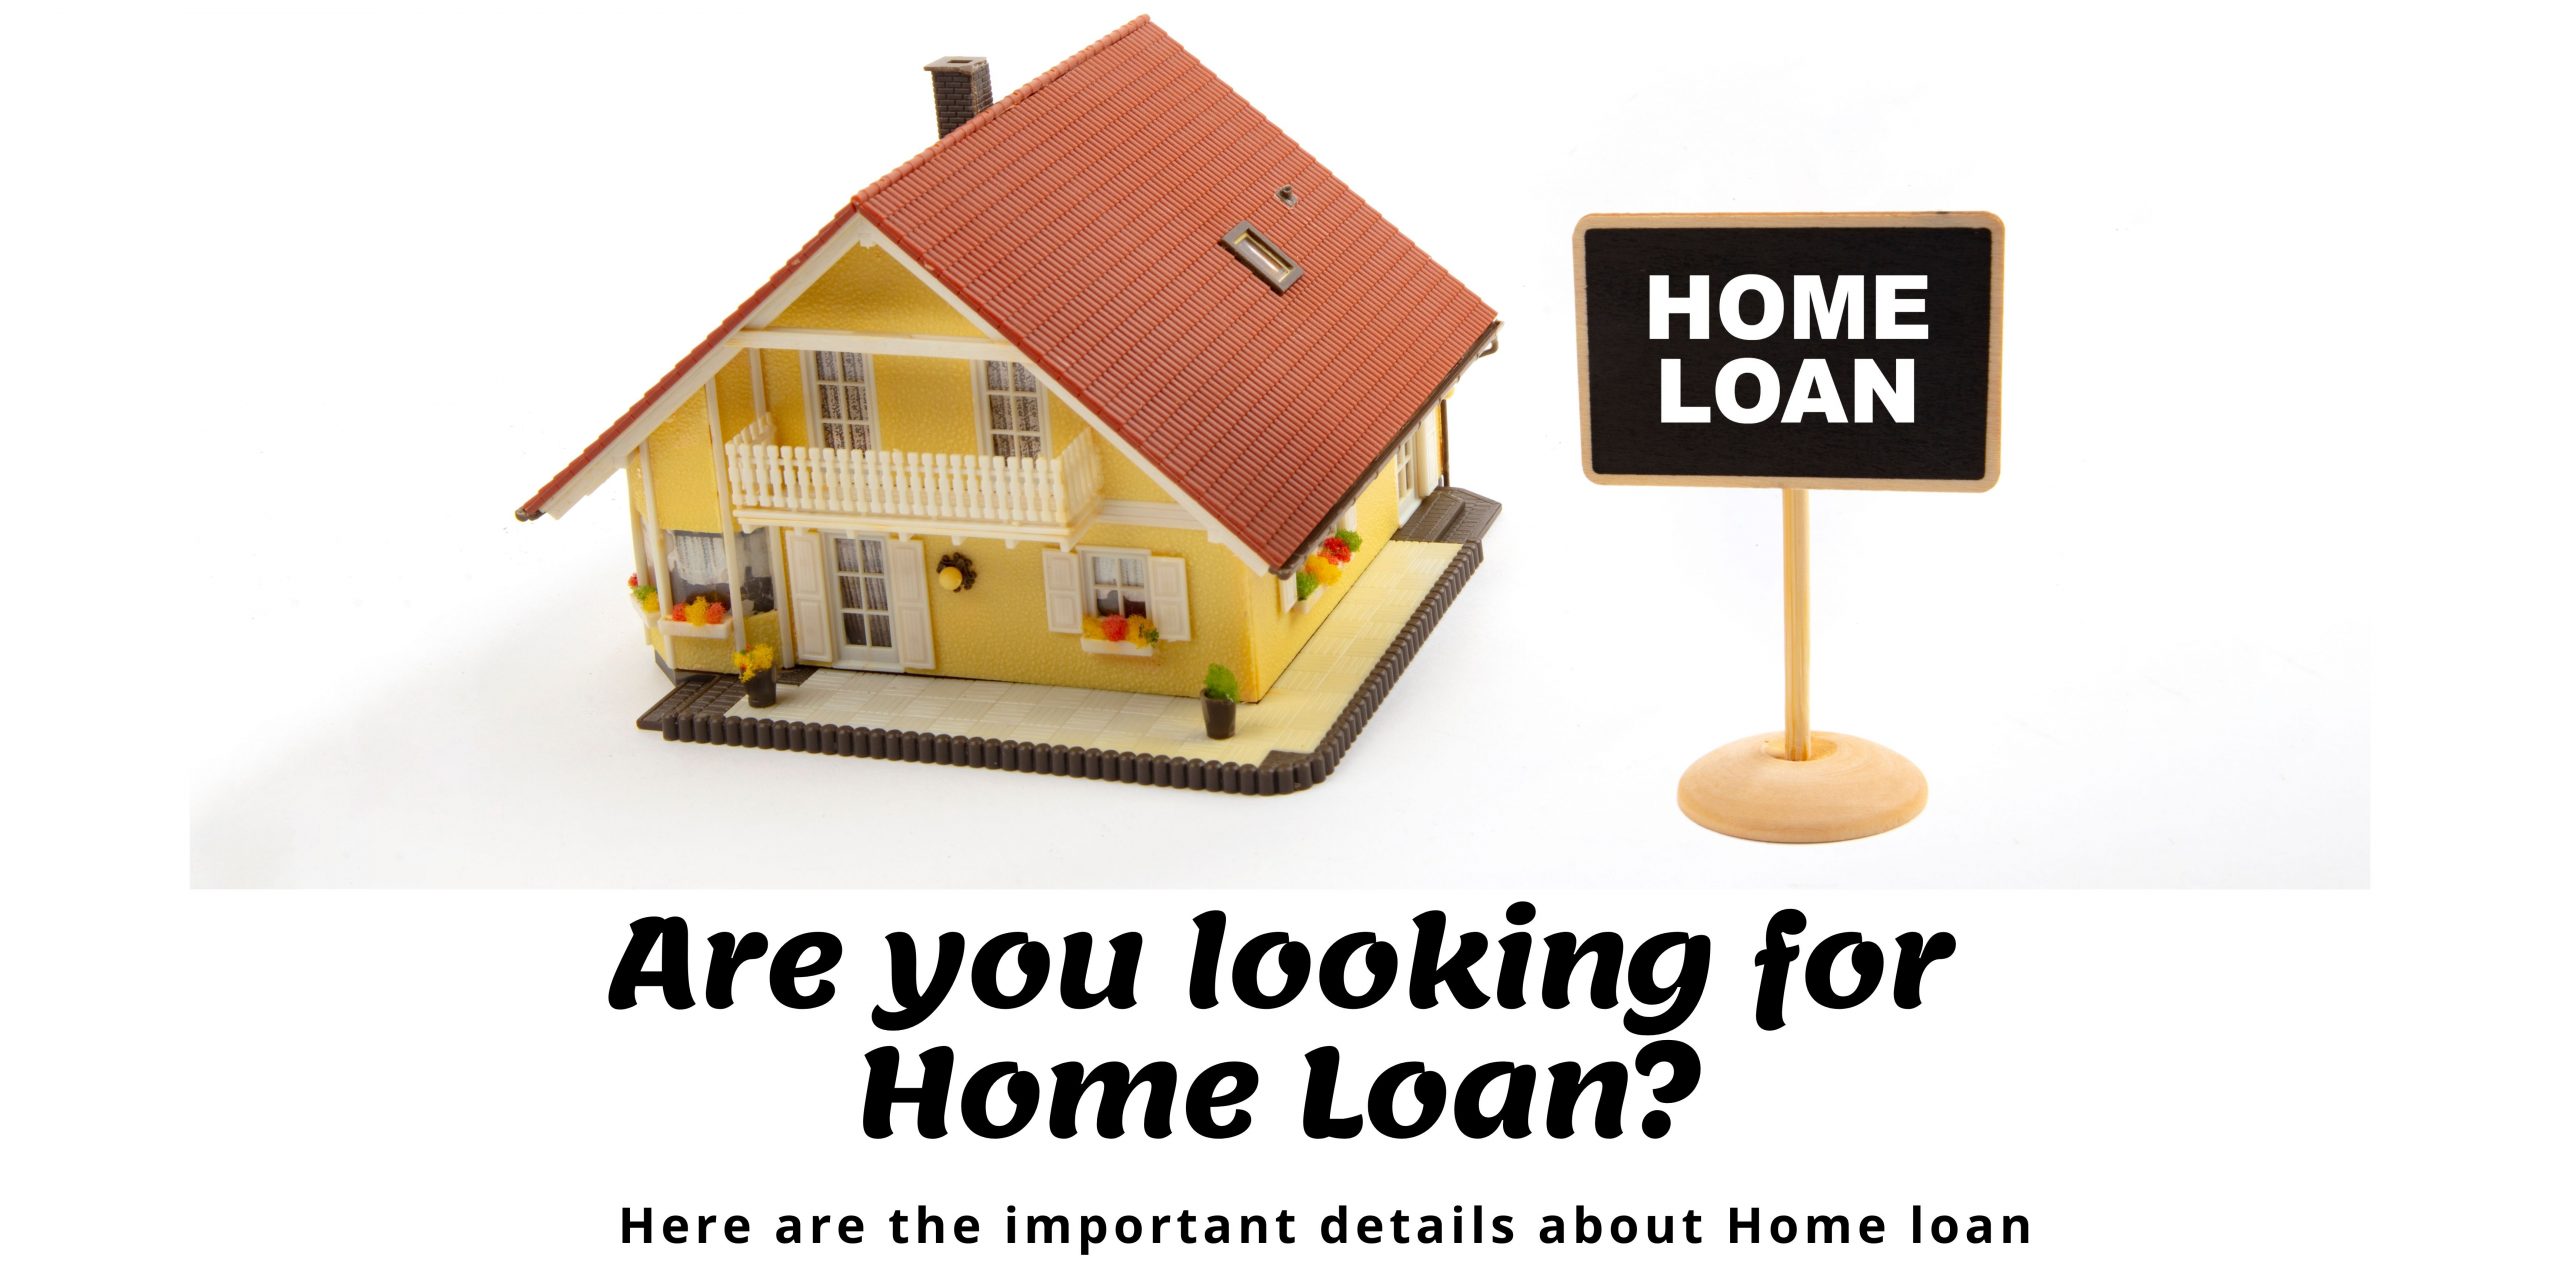 apply for Home loan